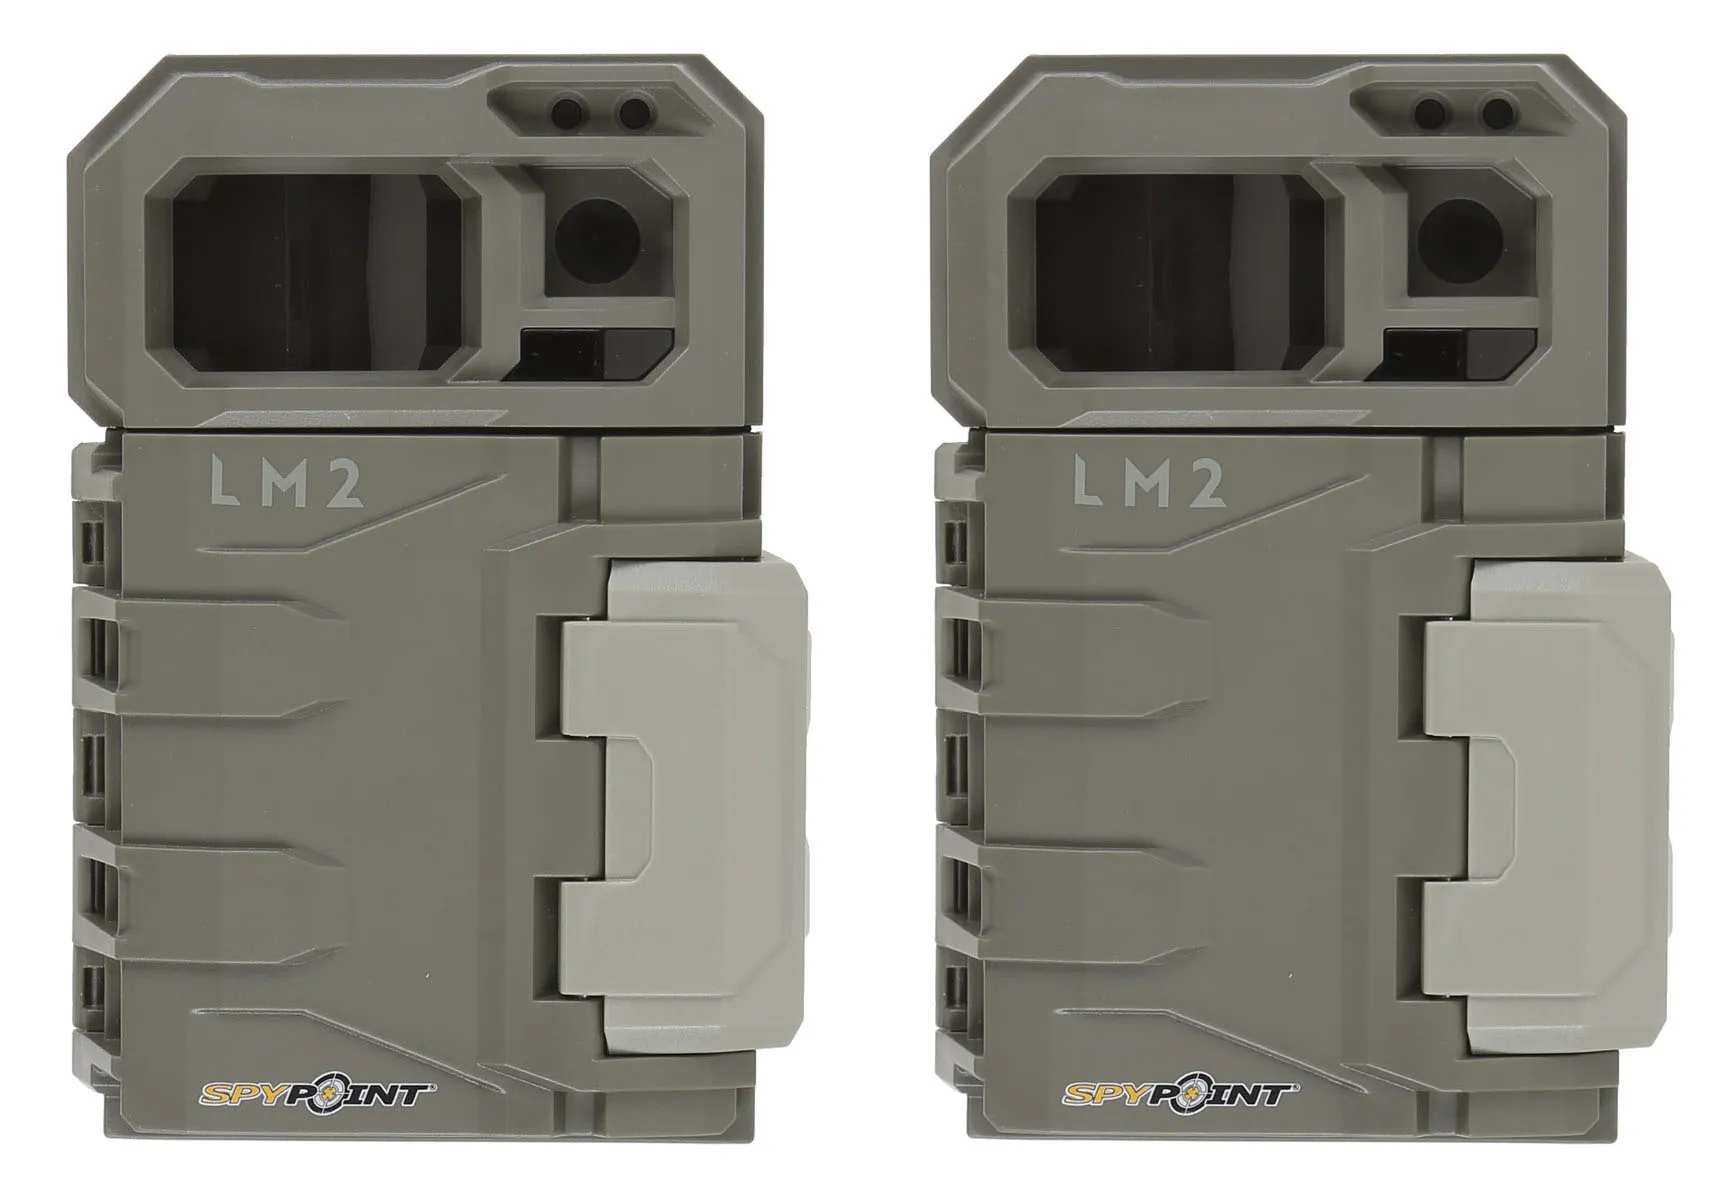 SpyPoint LM2 Cellular SMS Trail Nature Camera (2 camera pack)